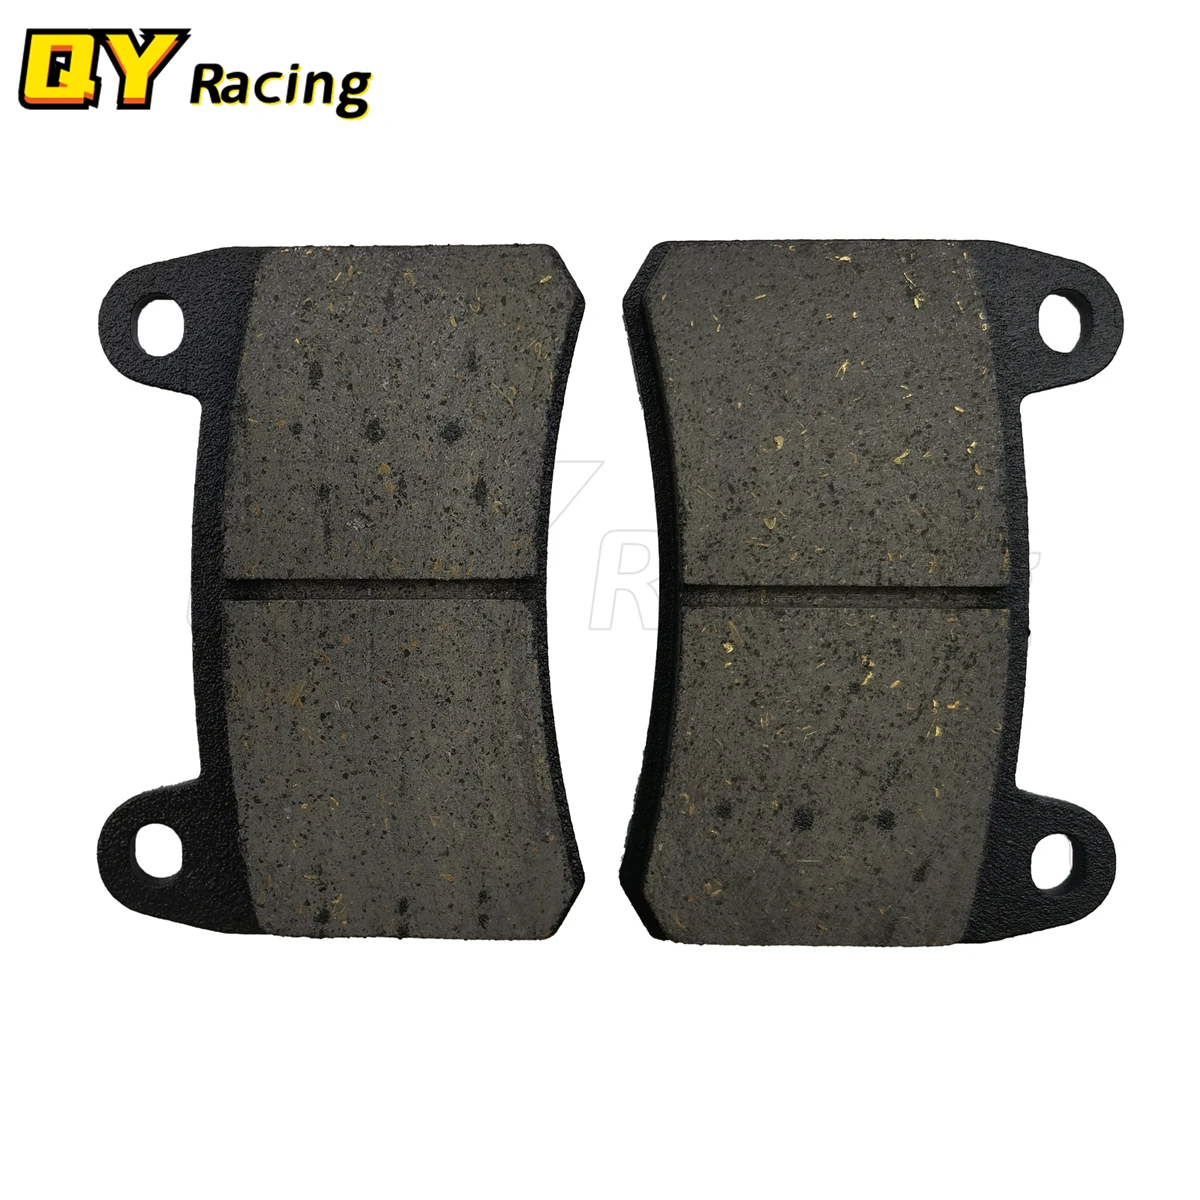 Motorcycle Front and Rear ke Pads  Benelli BJ300GS BJ300 BN300 TNT300 TNT 300 BN - £110.11 GBP